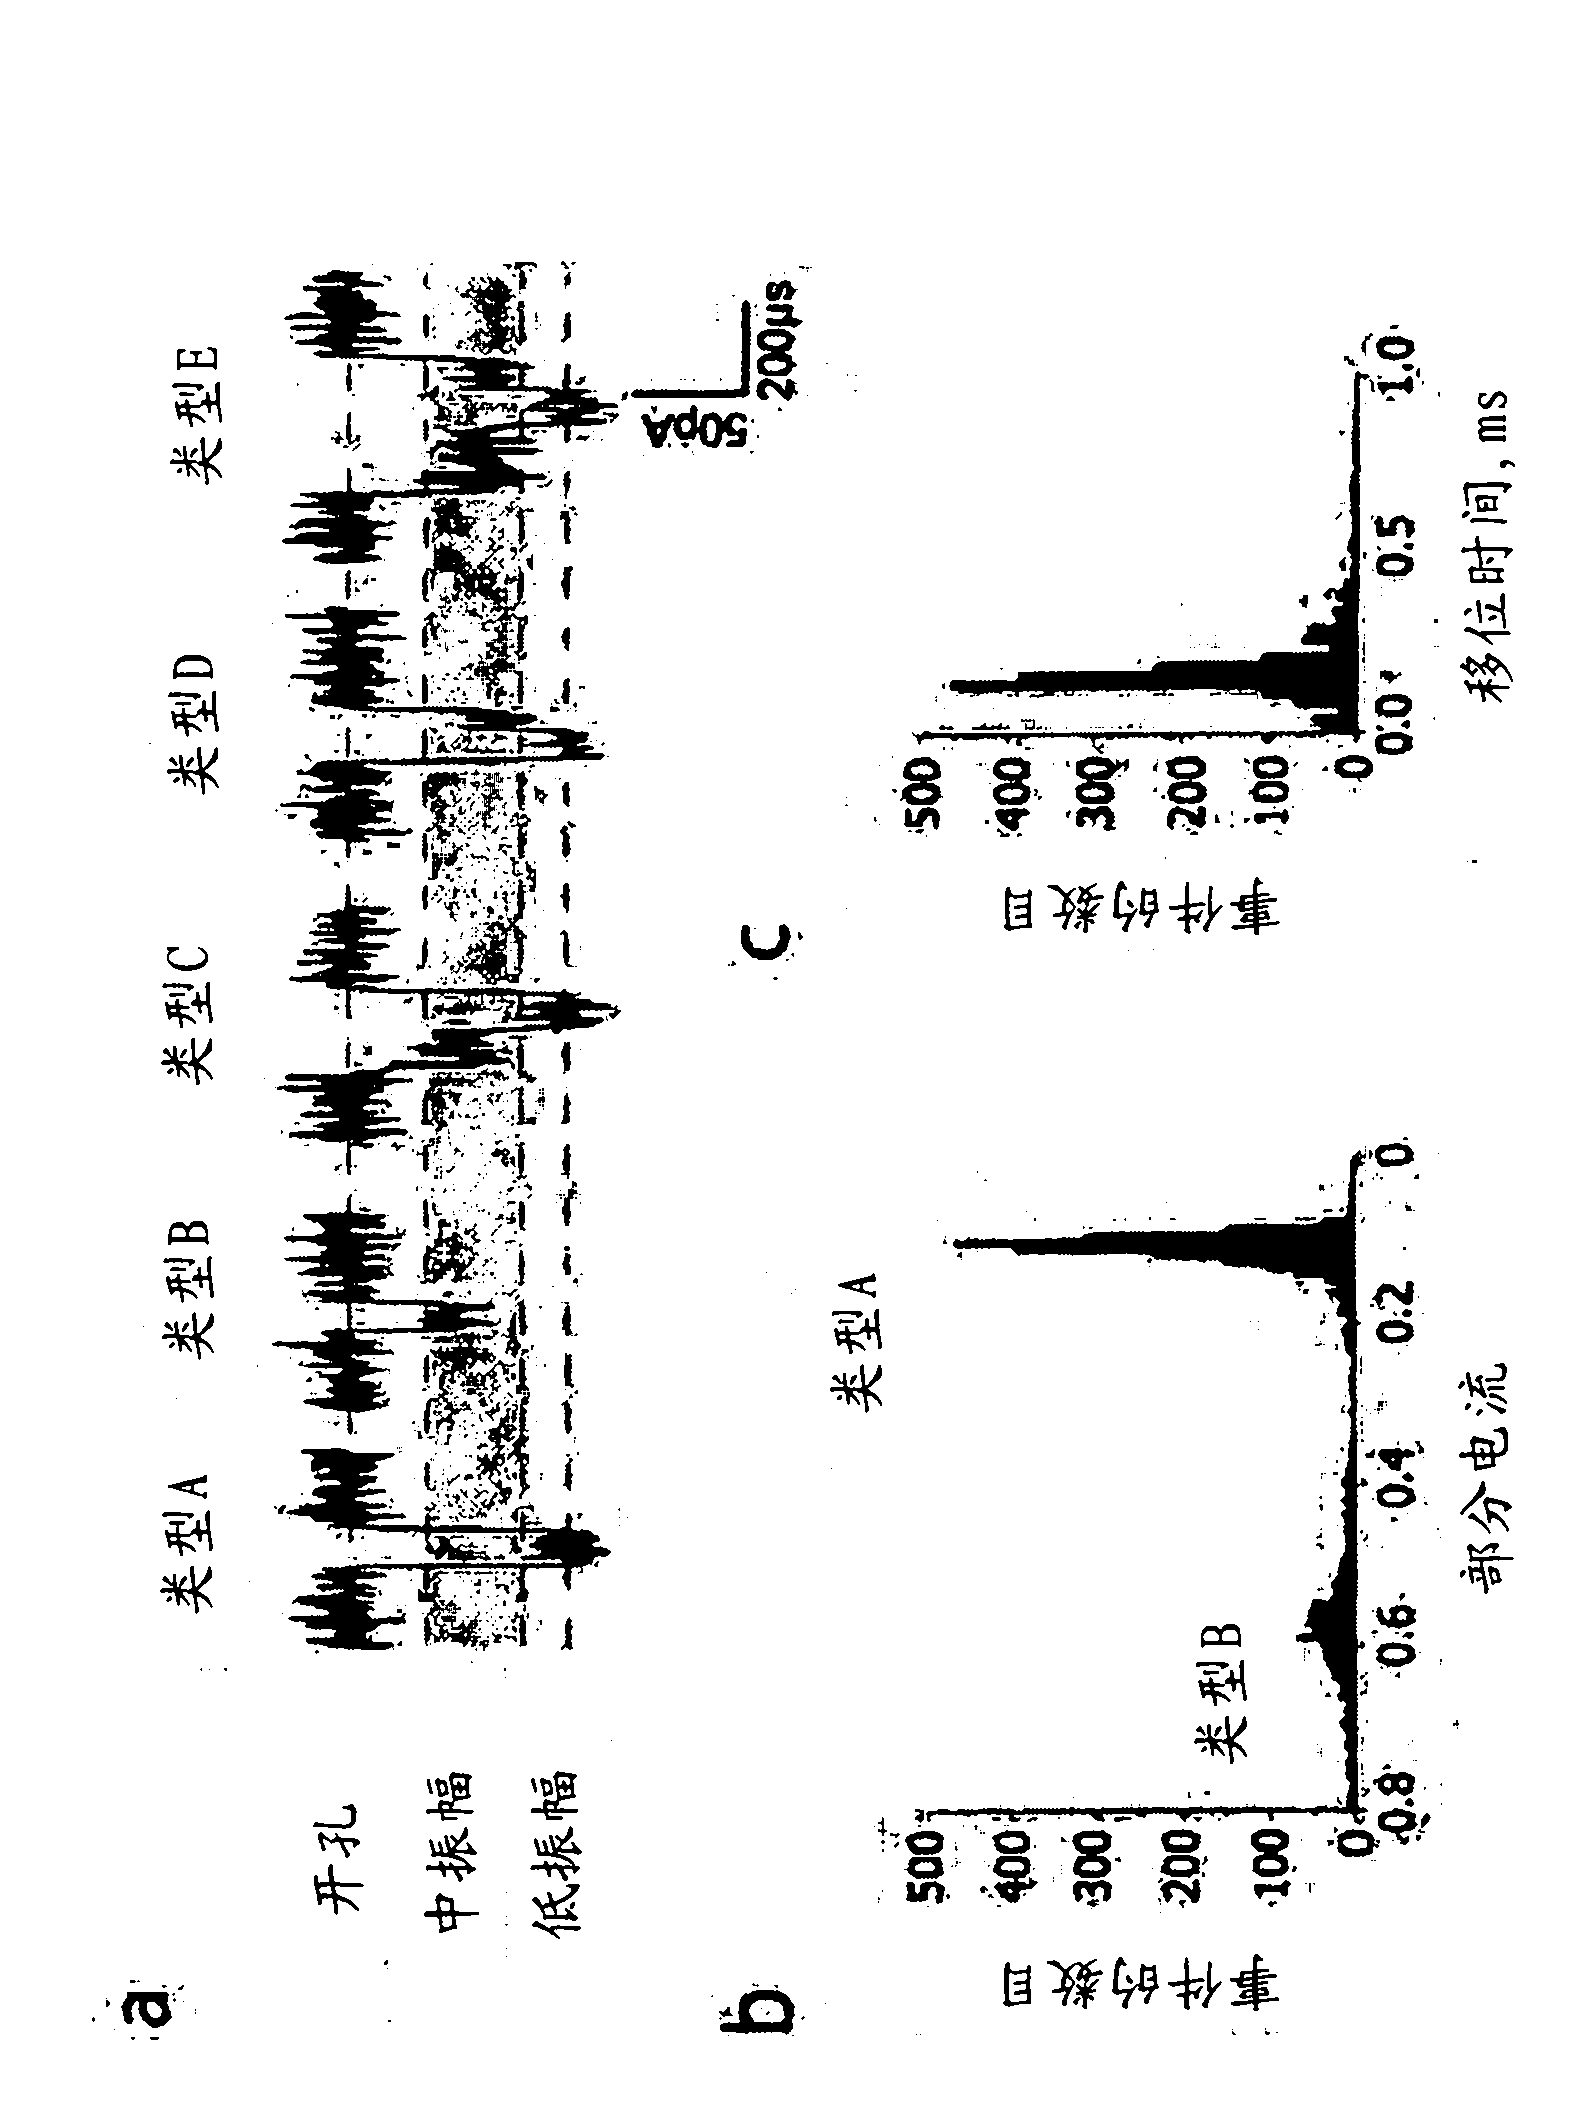 Methods of enhancing translocation of charged analytes through transmembrane protein pores